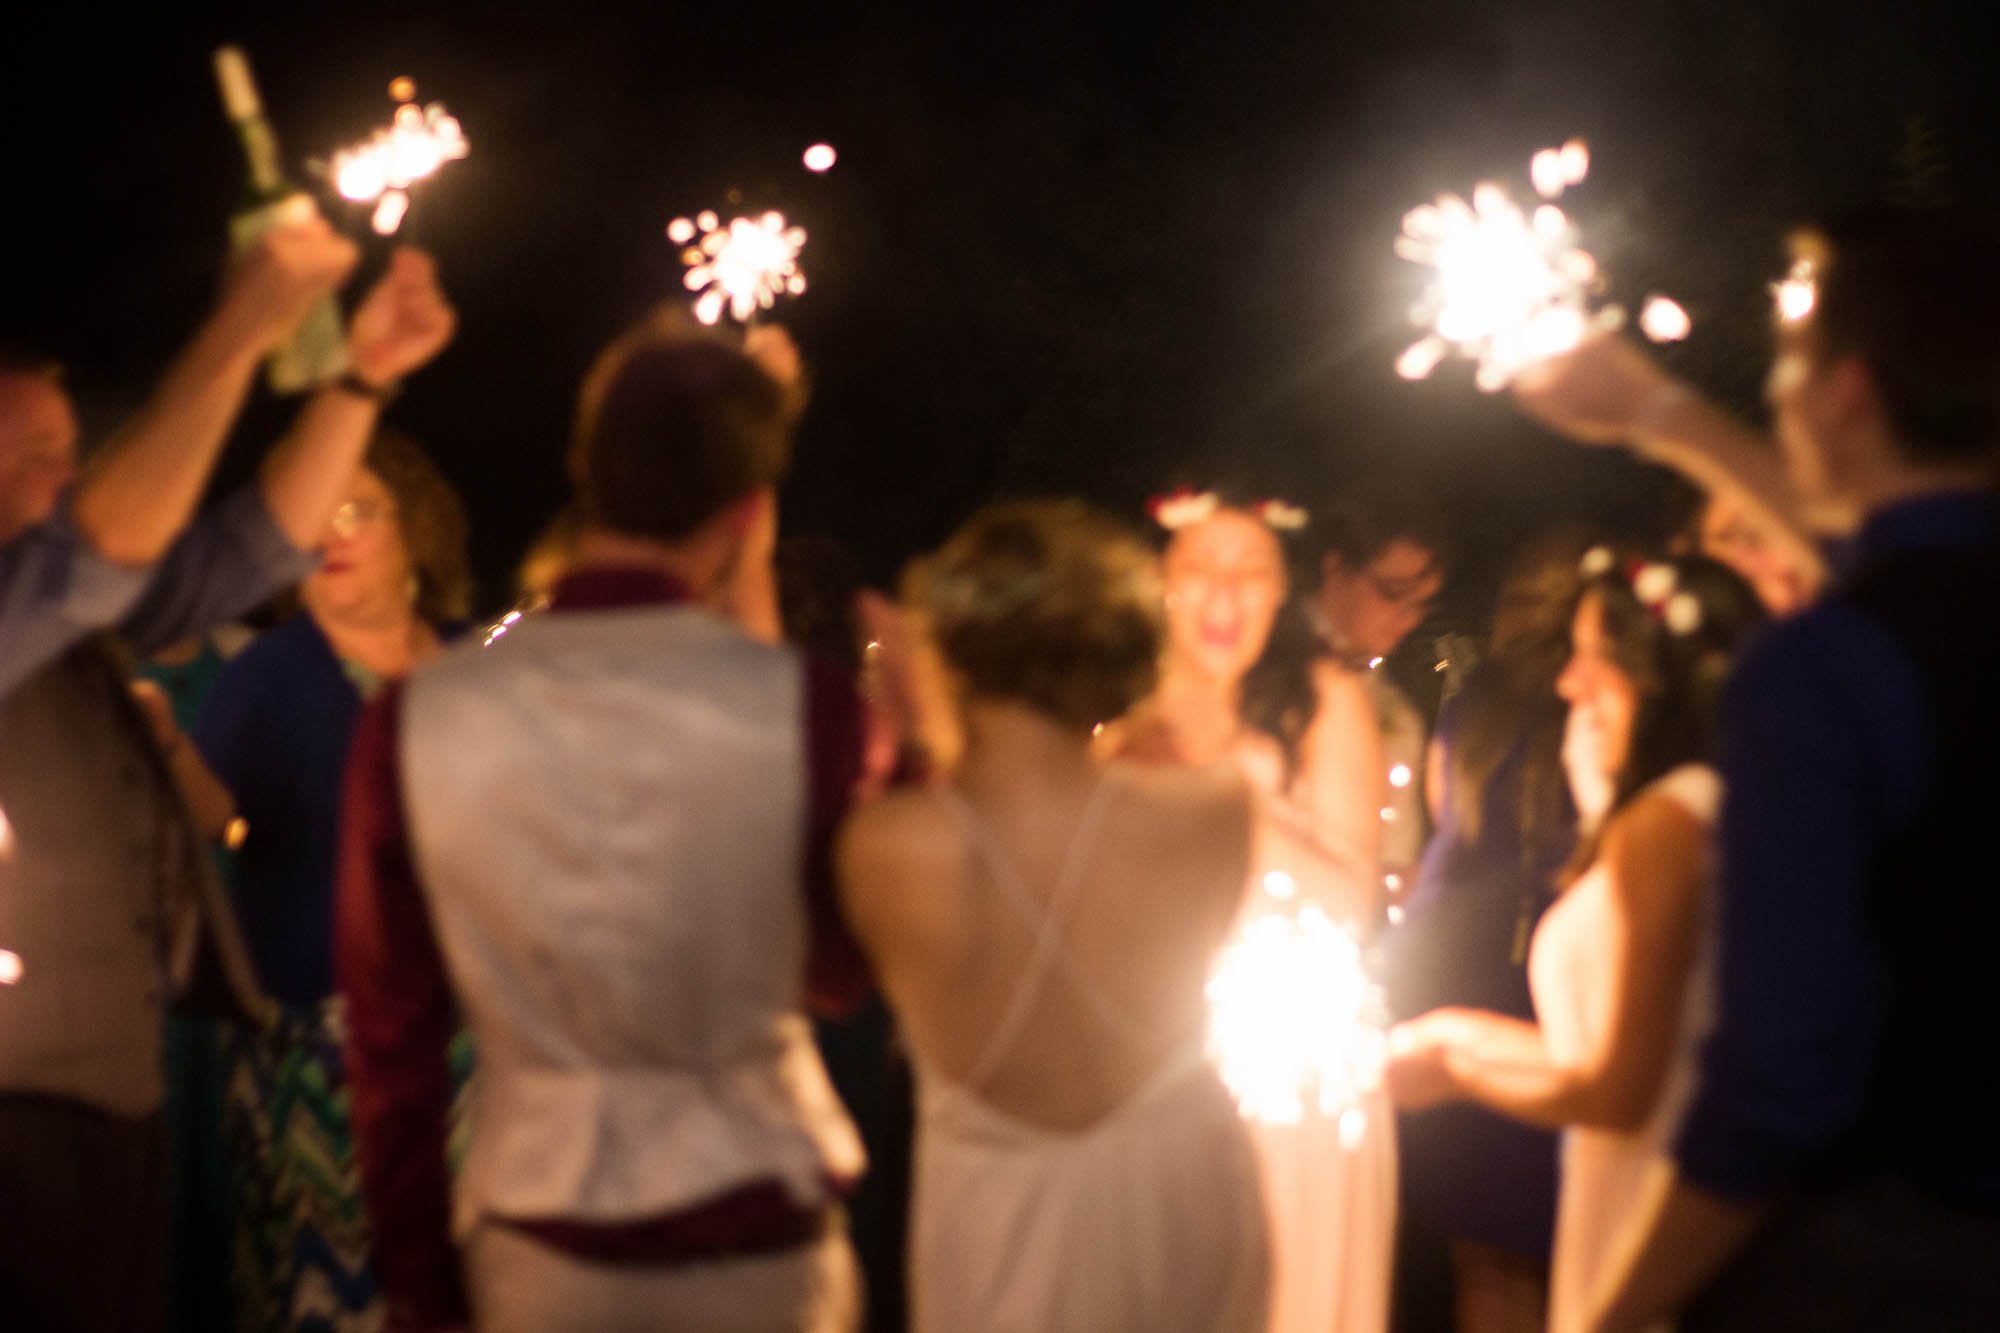 Wedding guests face each other holding sparklers at night